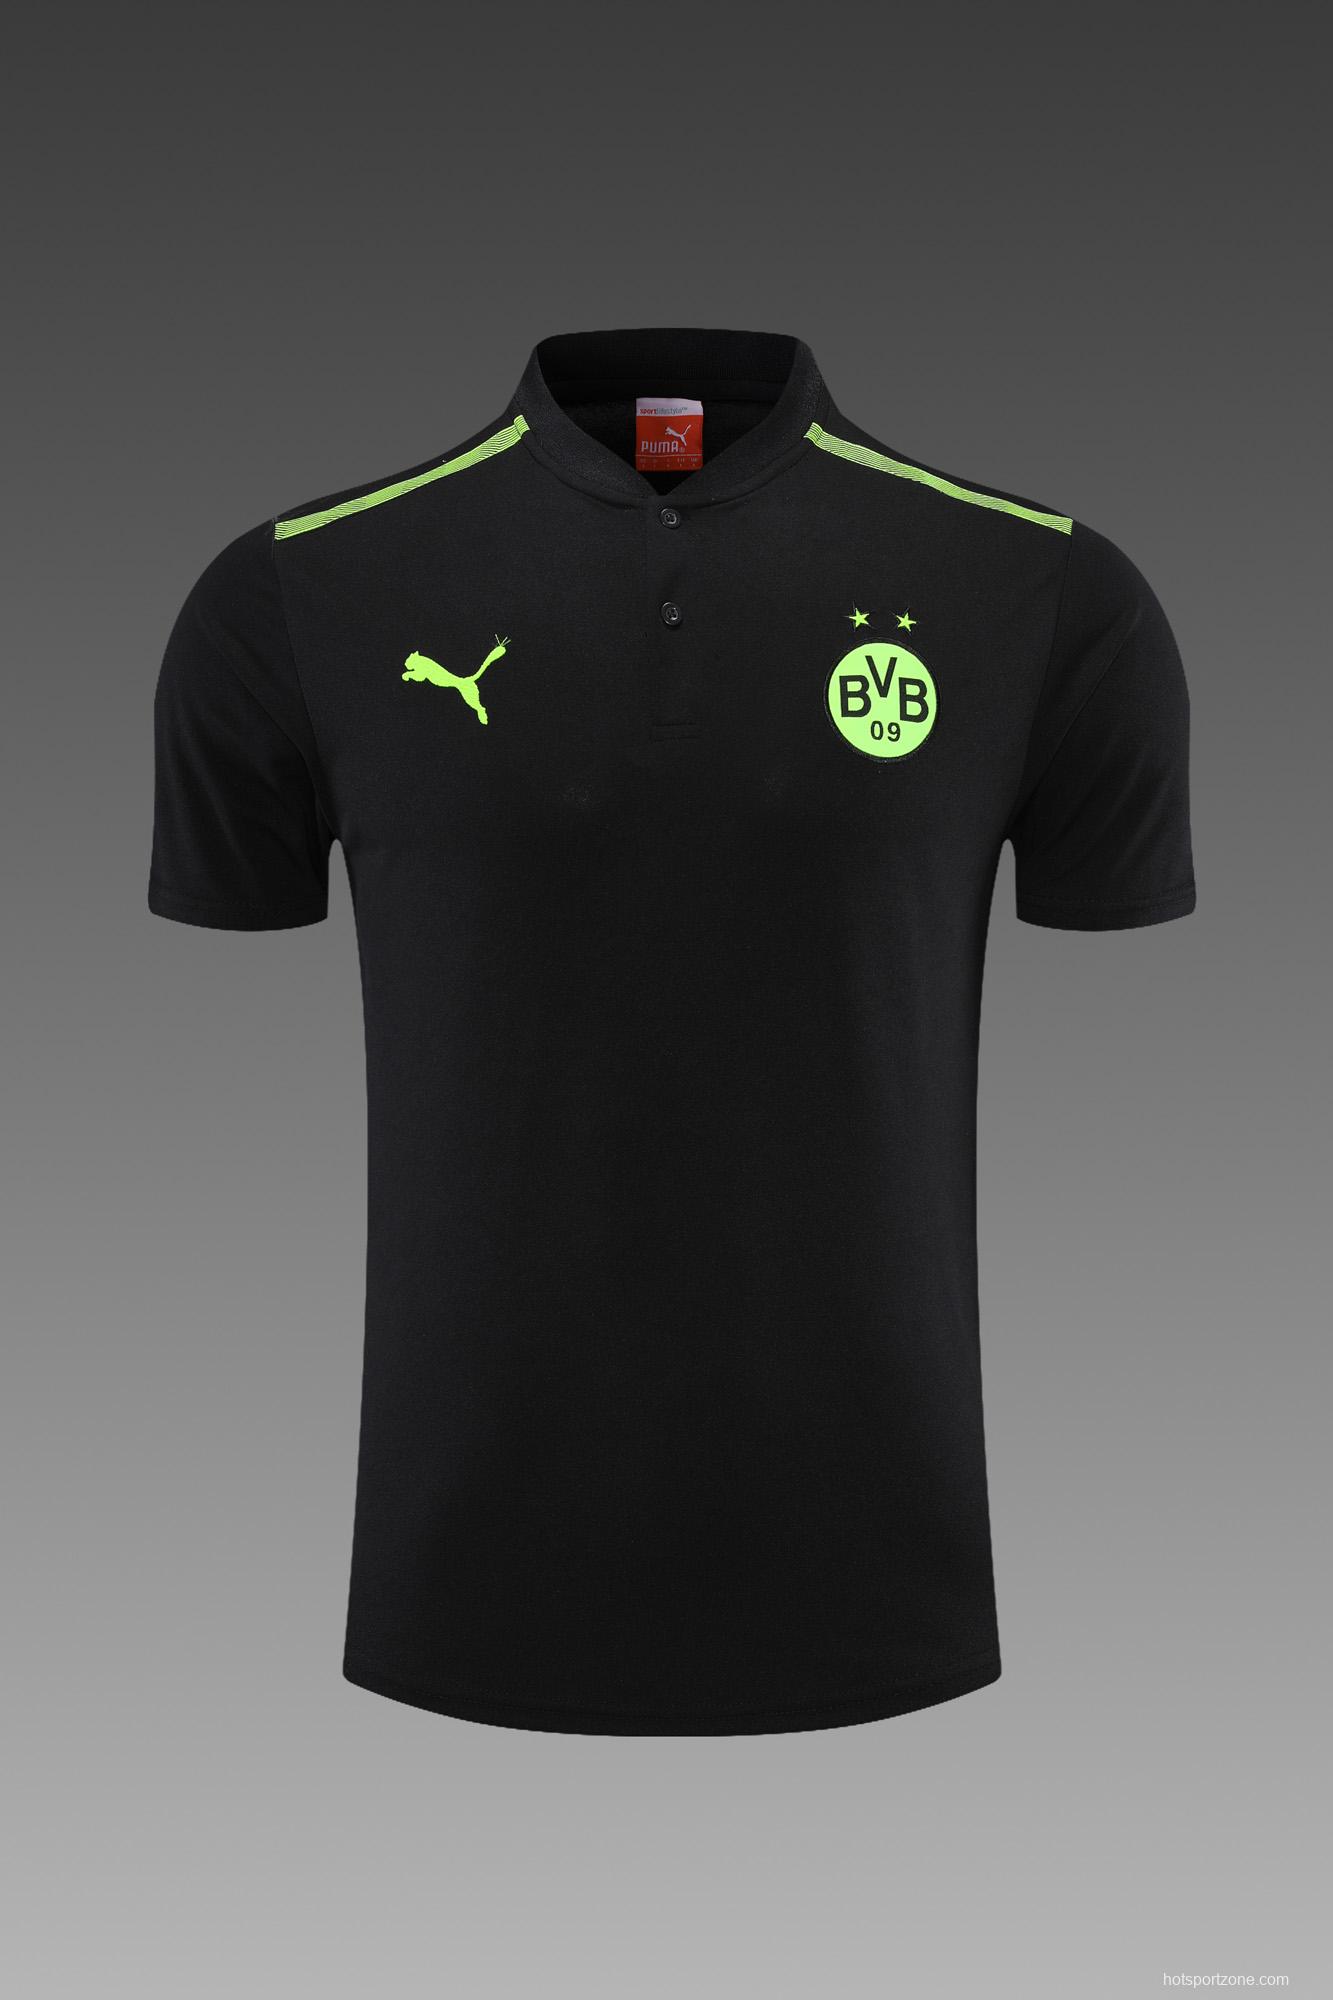 Borussia Dortmund POLO kit Black (not supported to be sold separately)